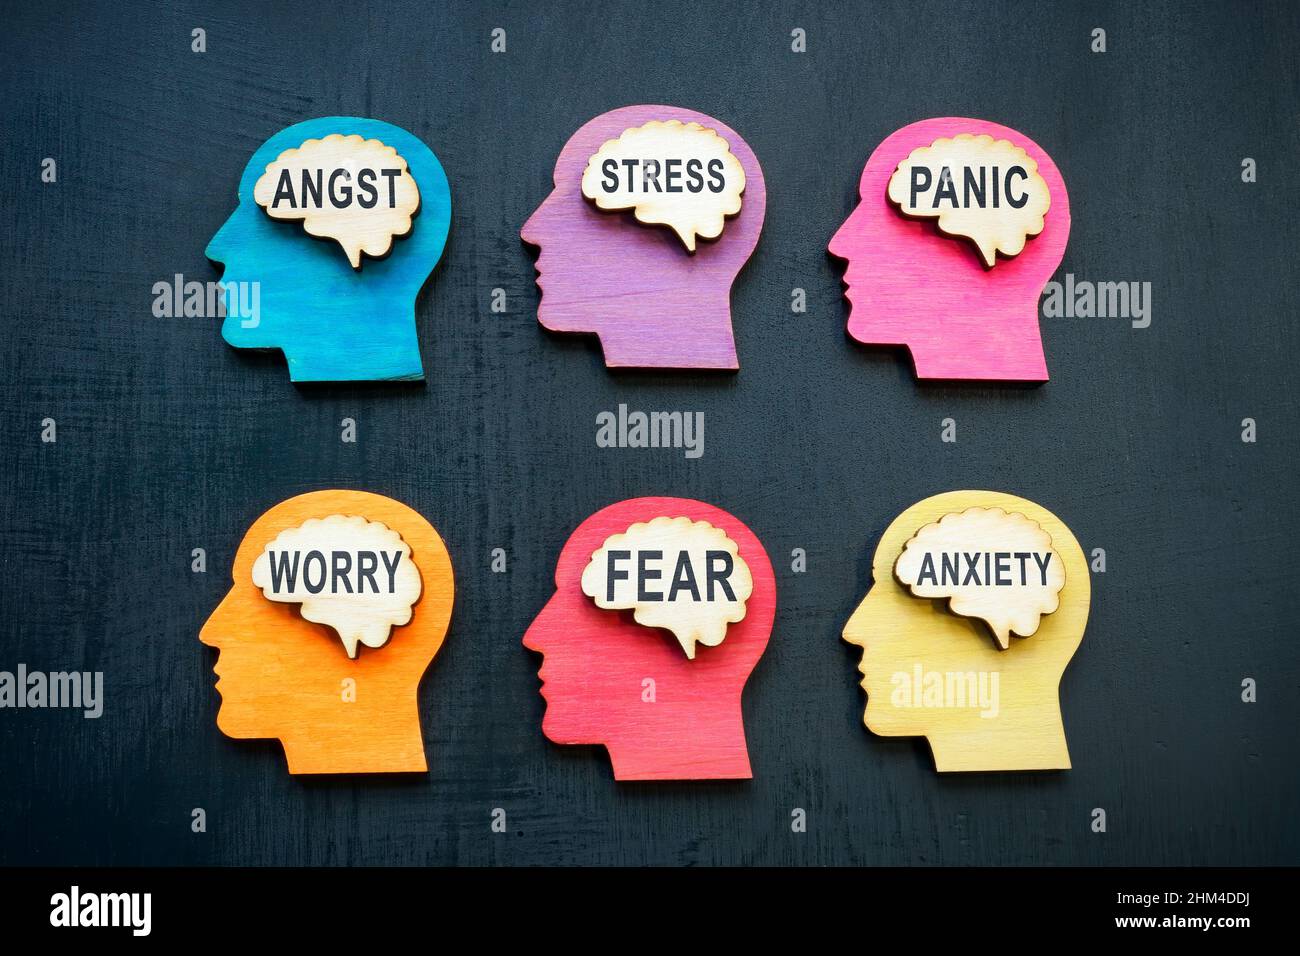 Human brains with words anxiety worry and panic. Stress at work. Stock Photo